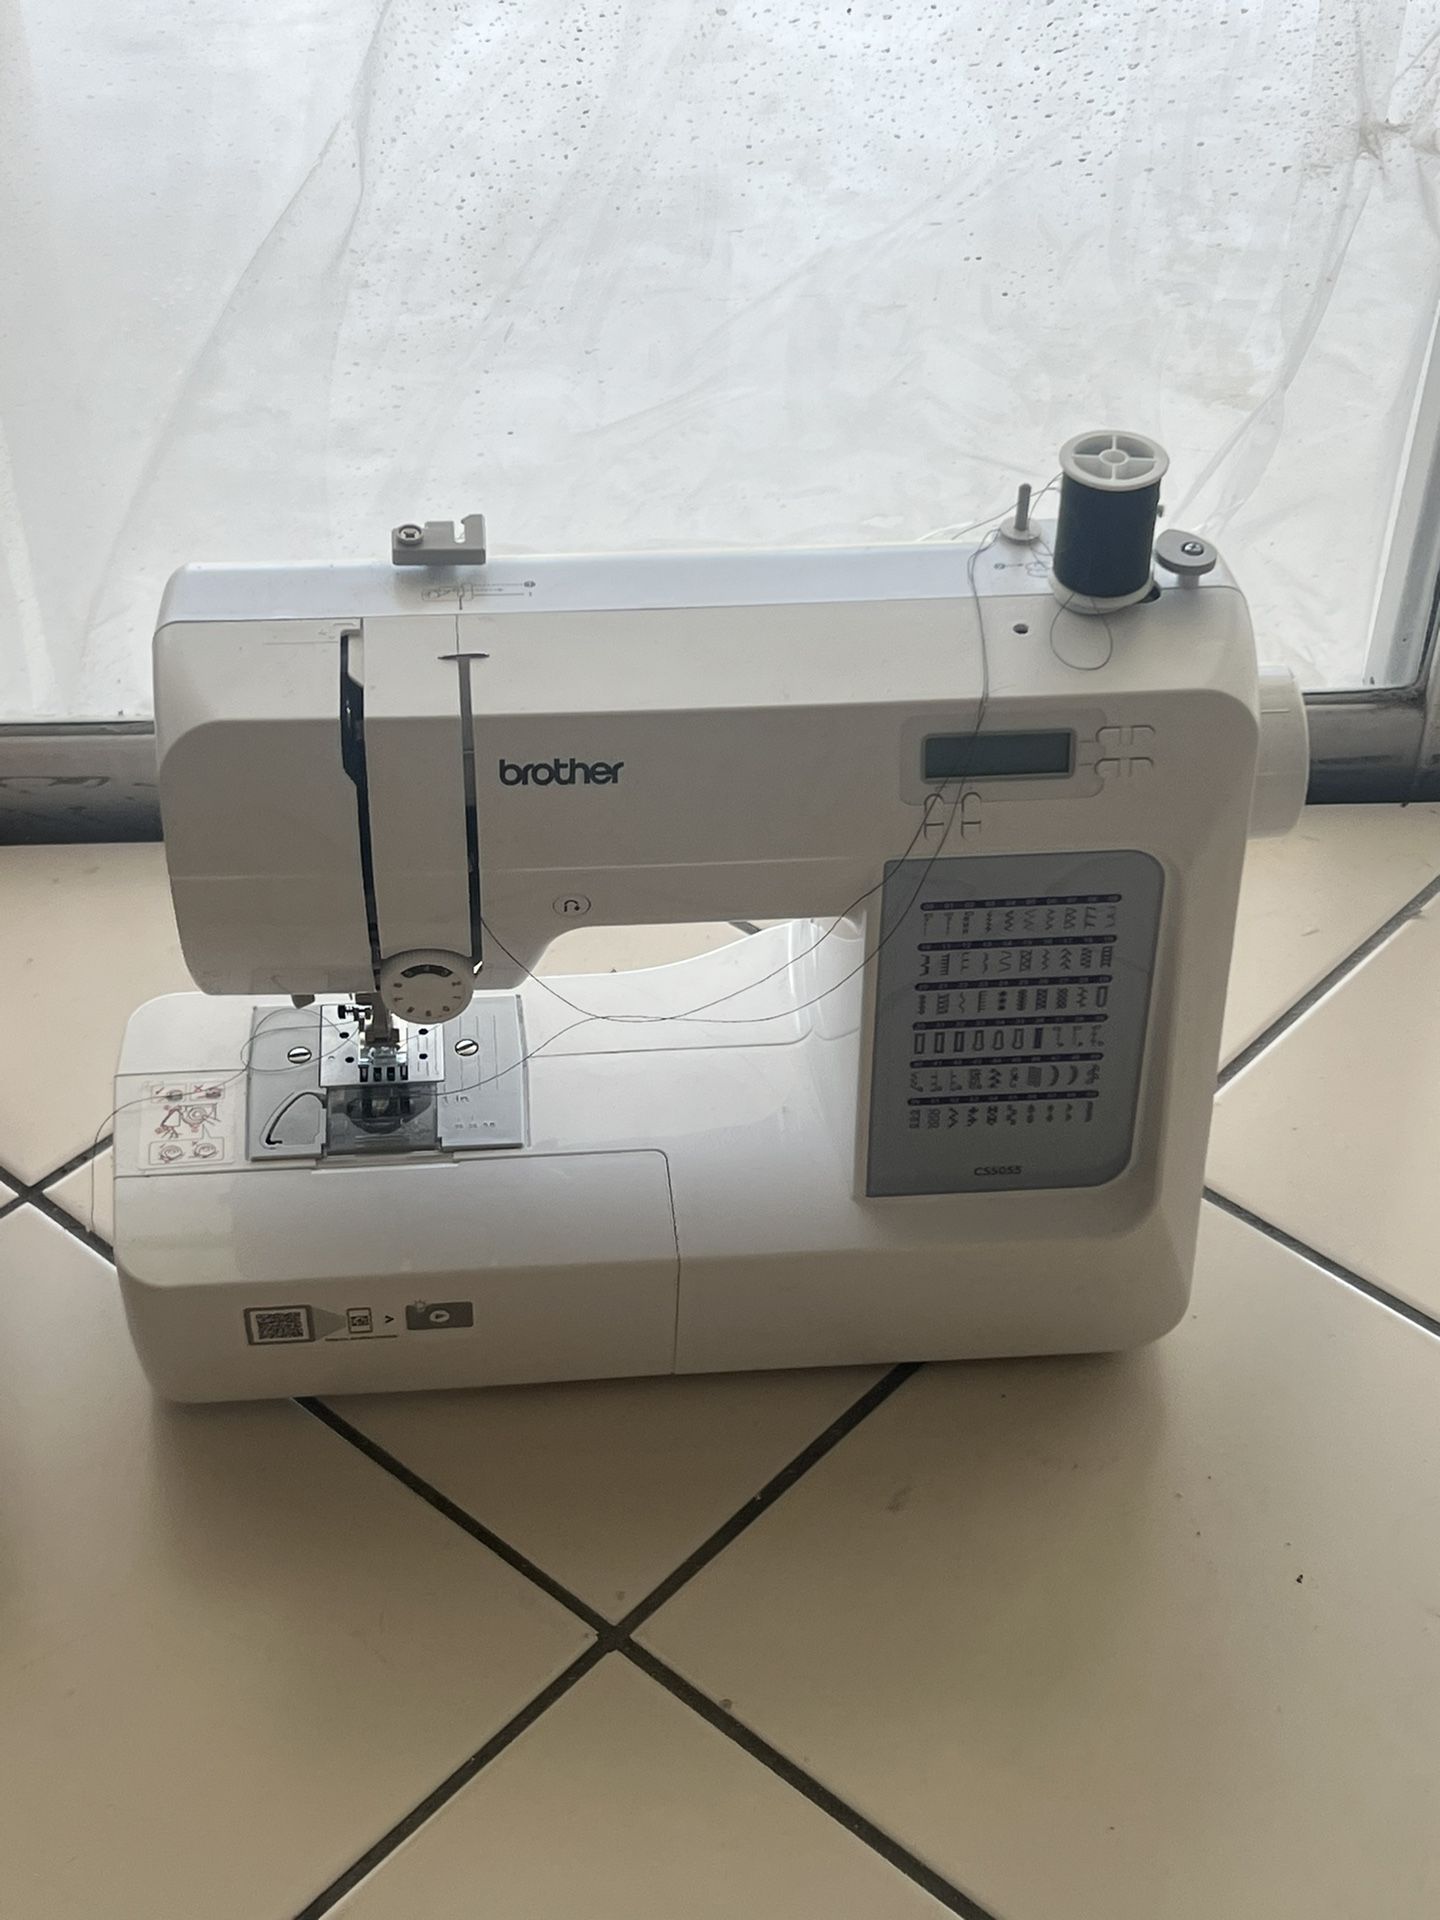 Brand new sewing machine Brother with sewing materials included 